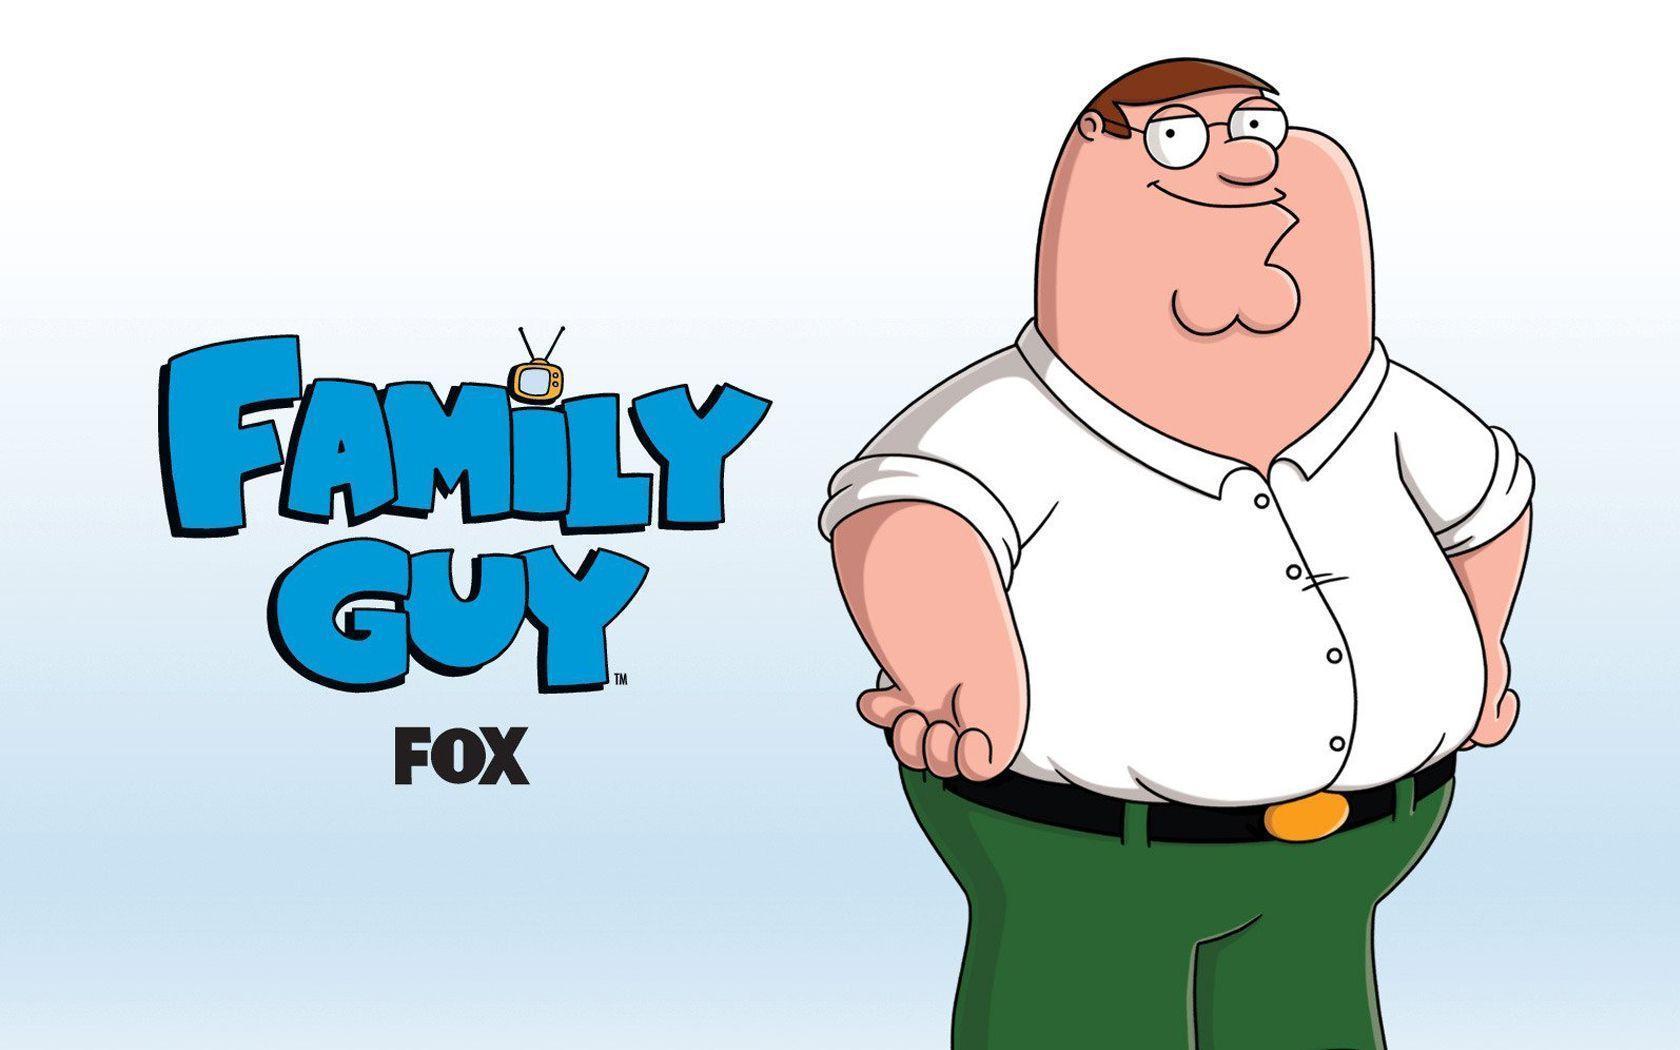 Peter Griffin Wallpapers - Wallpaper Cave
